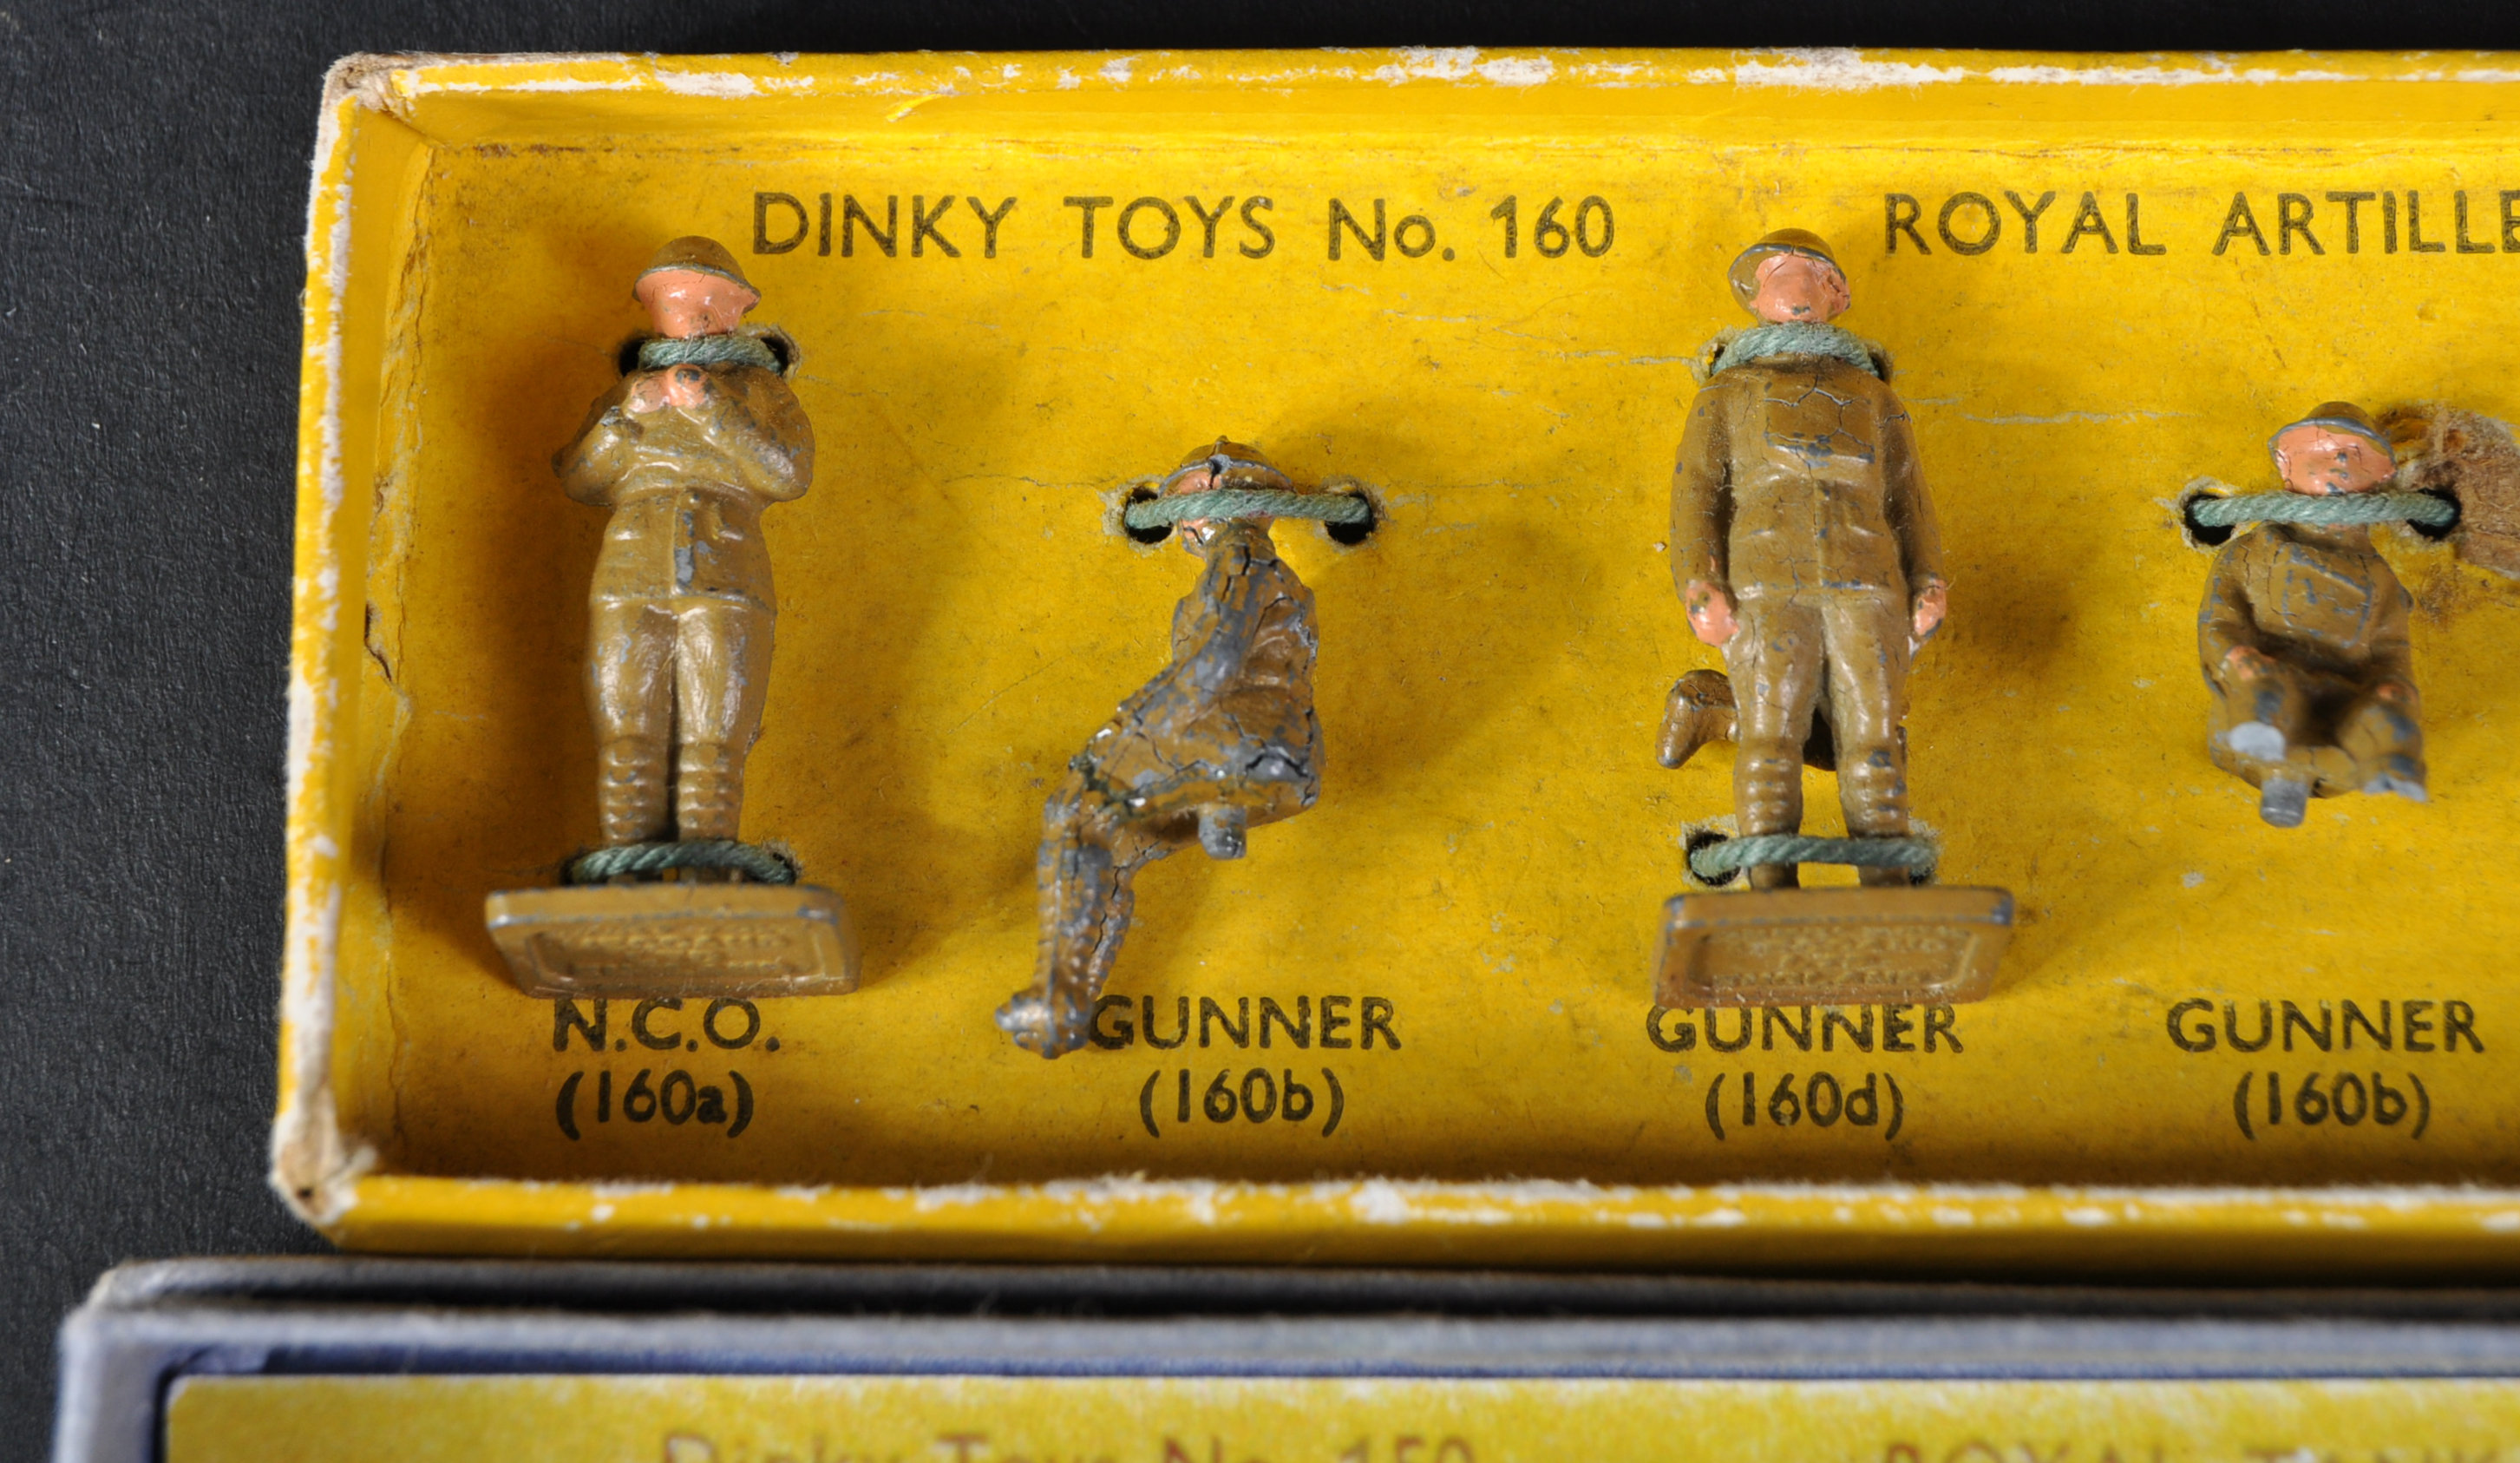 VINTAGE DINKYS TOYS DIECAST MILITARY PERSONNEL FIGURES - Image 2 of 5